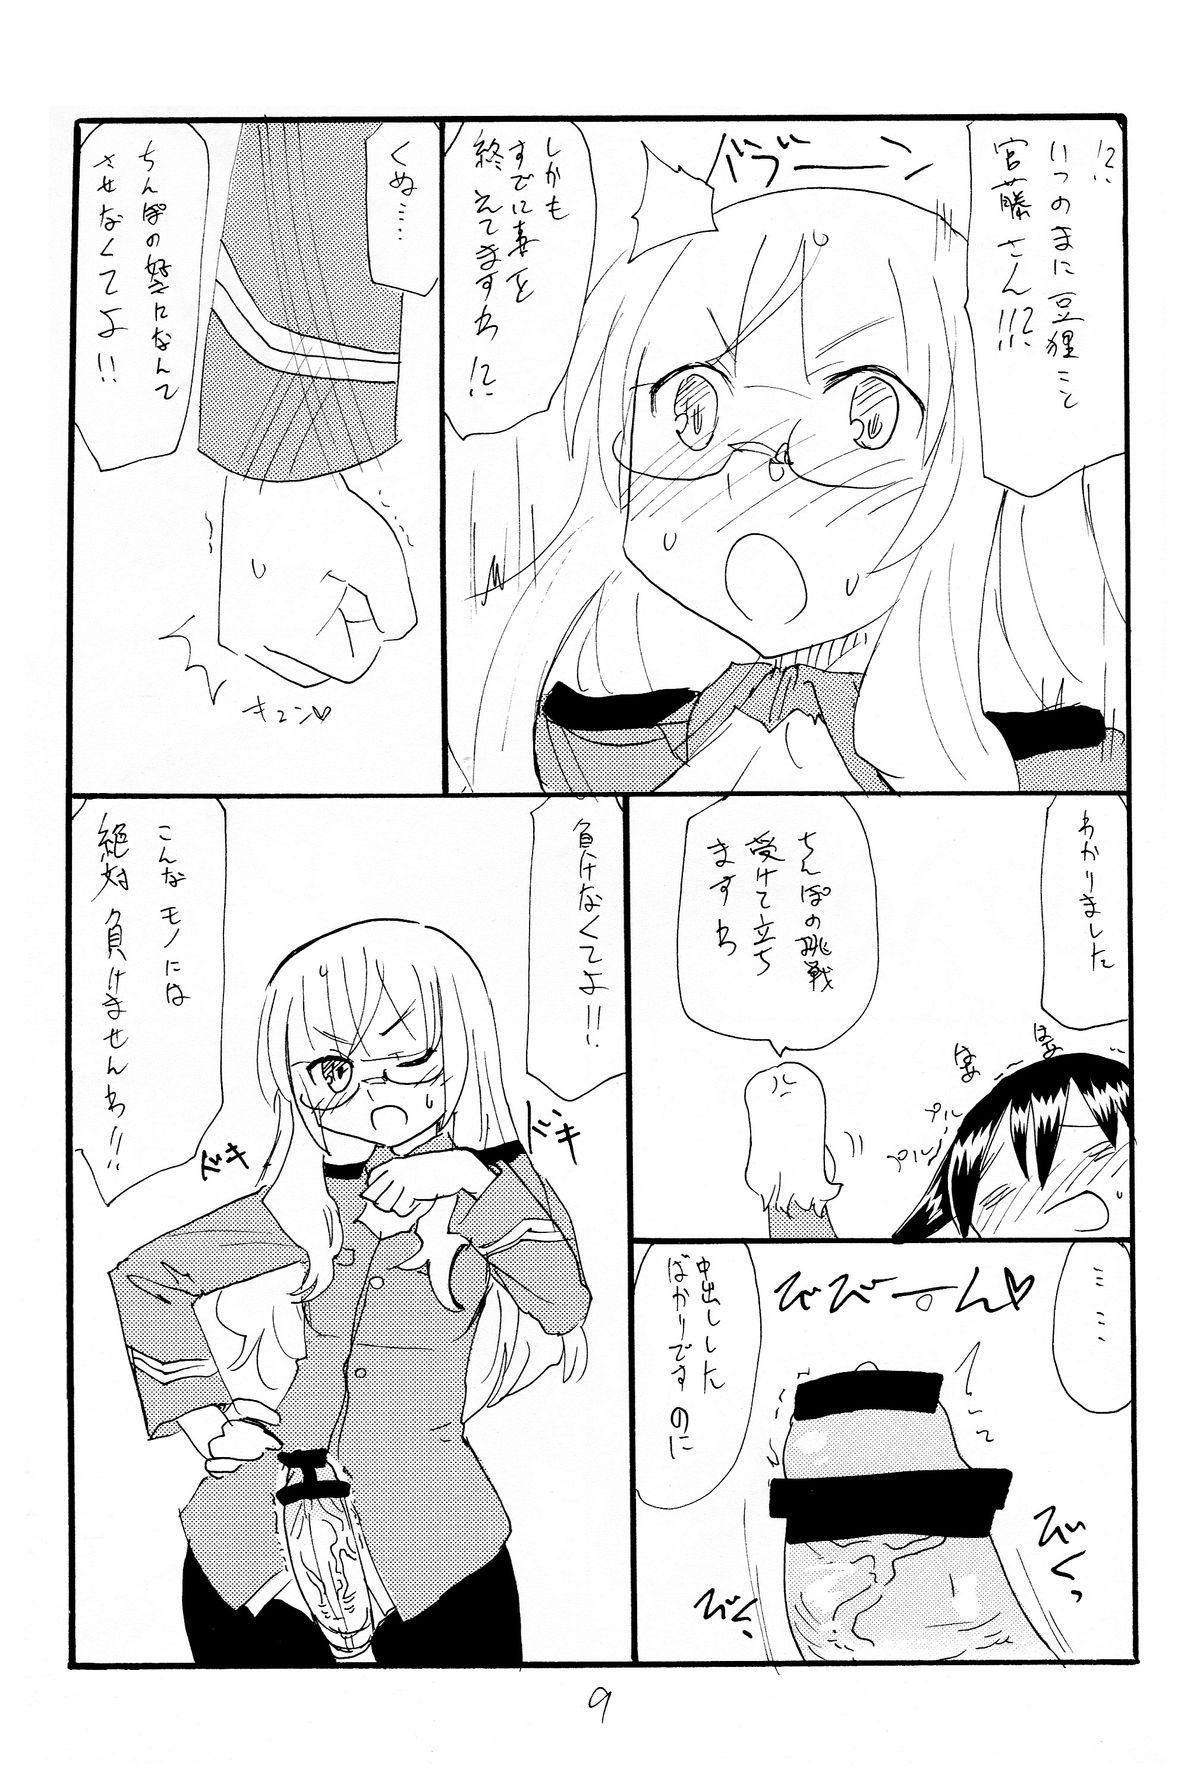 Les Strike Ape - Strike witches Pay - Page 8